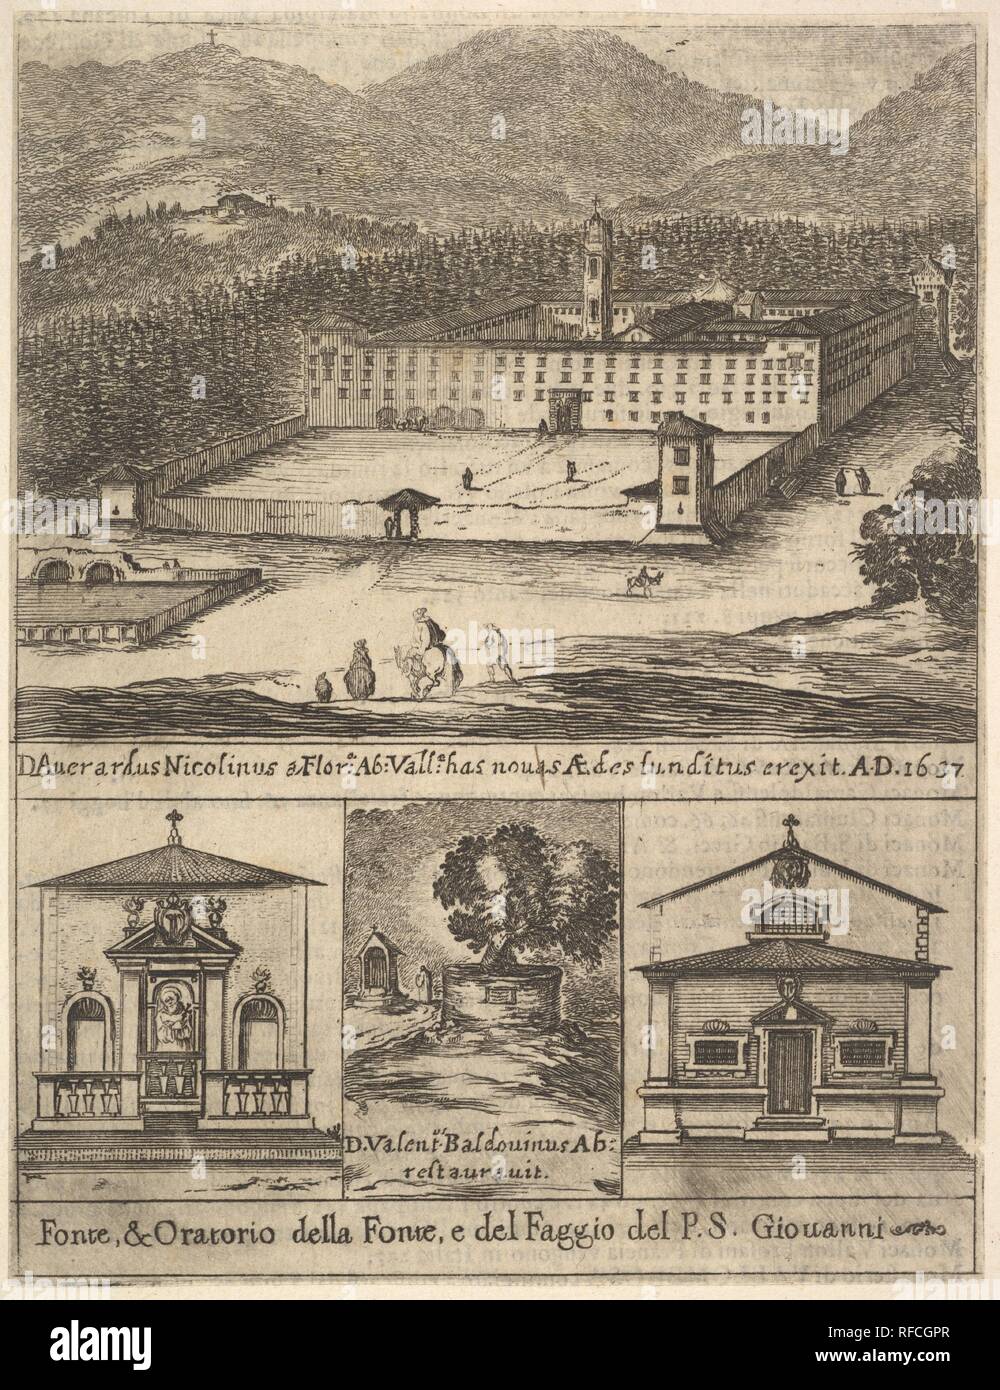 Four views: at top, a view of the new monastery of Vallombrosa, at bottom left and right, a view of a chapel, at bottom center, the tree of St. John Gualbert, from 'Frontispiece and four scenes from the life of Saint John Gualbert' (Frontispice et quatre vignettes pour une vie de Saint Jean Gualbert). Artist: Stefano della Bella (Italian, Florence 1610-1664 Florence). Dimensions: Sheet: 6 3/4 x 5 3/16 in. (17.1 x 13.2 cm)  Mount: 7 3/8 x 5 11/16 in. (18.7 x 14.5 cm). Series/Portfolio: 'Frontispiece and four scenes from the life of Saint John Gualbert' (Frontispice et quatre vignettes pour une  Stock Photo